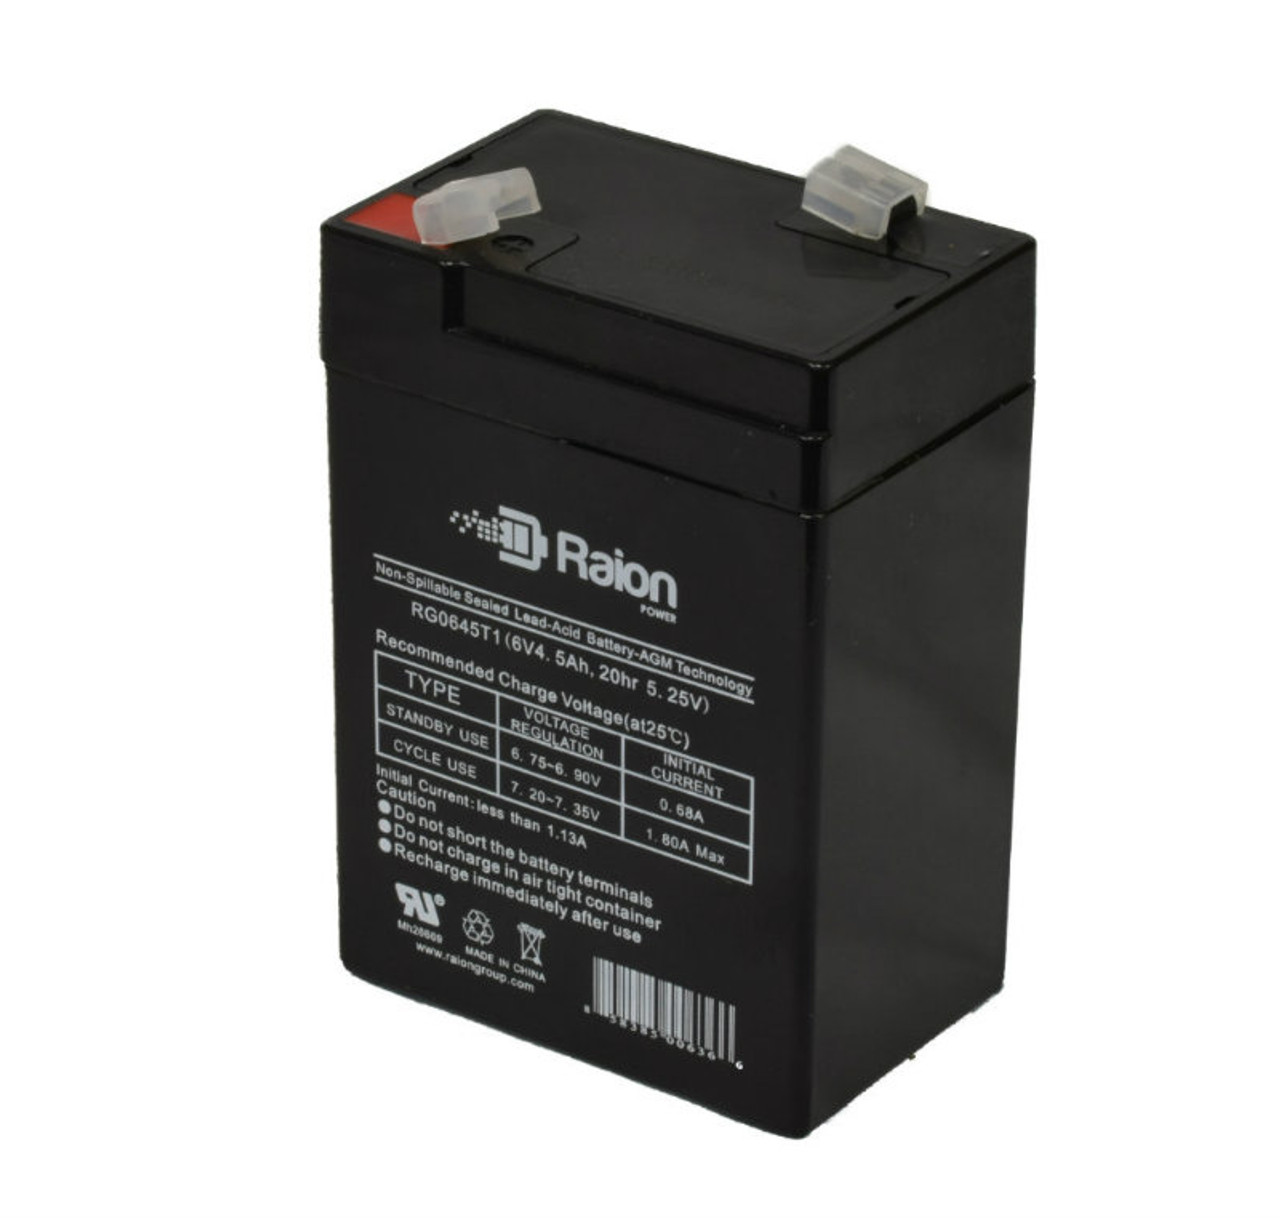 Raion Power RG0645T1 6V 4.5Ah Replacement Battery Cartridge for Mcgaw 521 Intelligent Pump